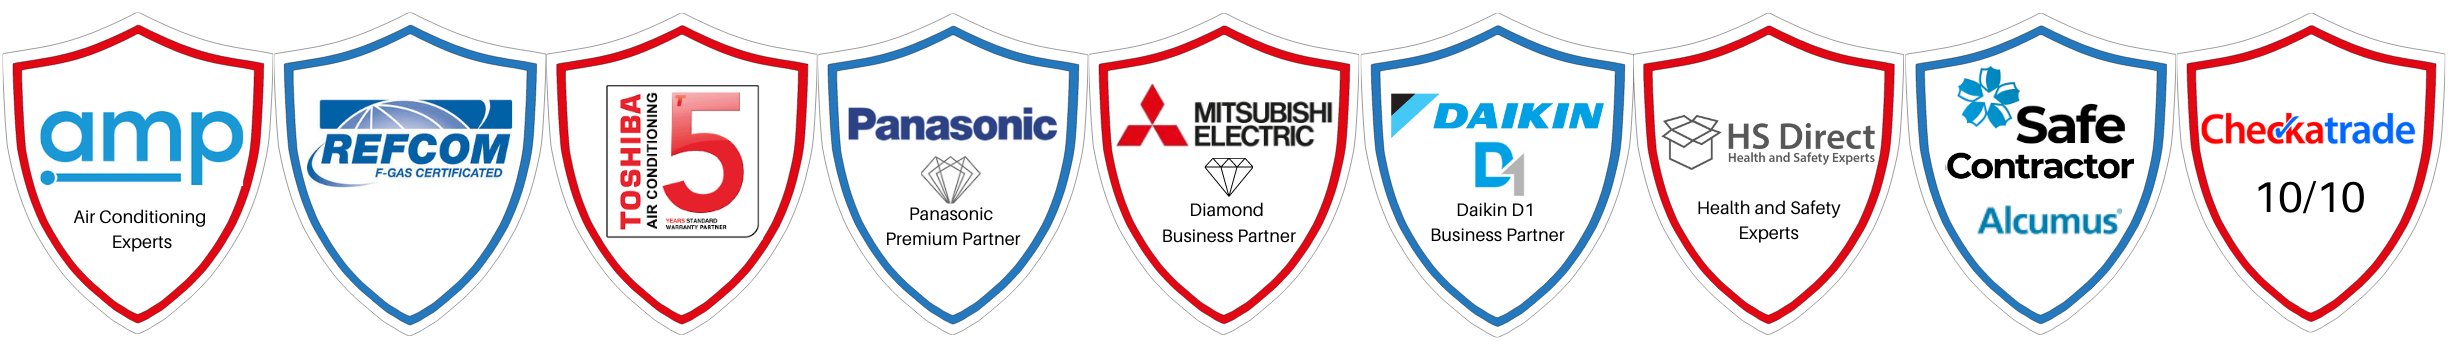 SubCoolFM Accreditations shields including AMP, Refcom, Toshiba, Mitsubishi Electric, Daikin, Panasonic, Safe Contractor, Health and Safety Direct